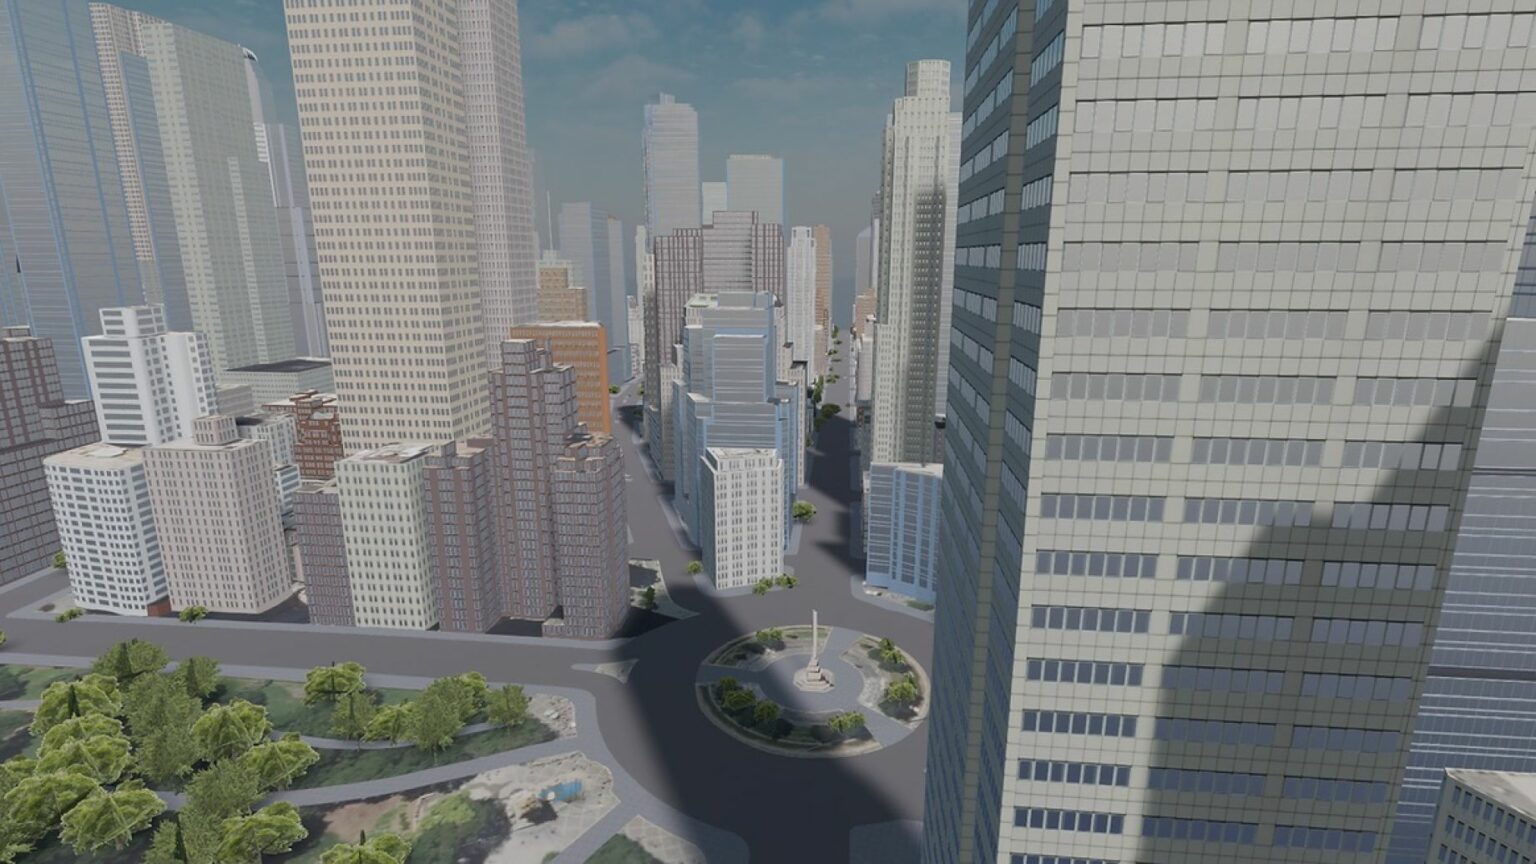 Free 3D Model of New York to use in other Software